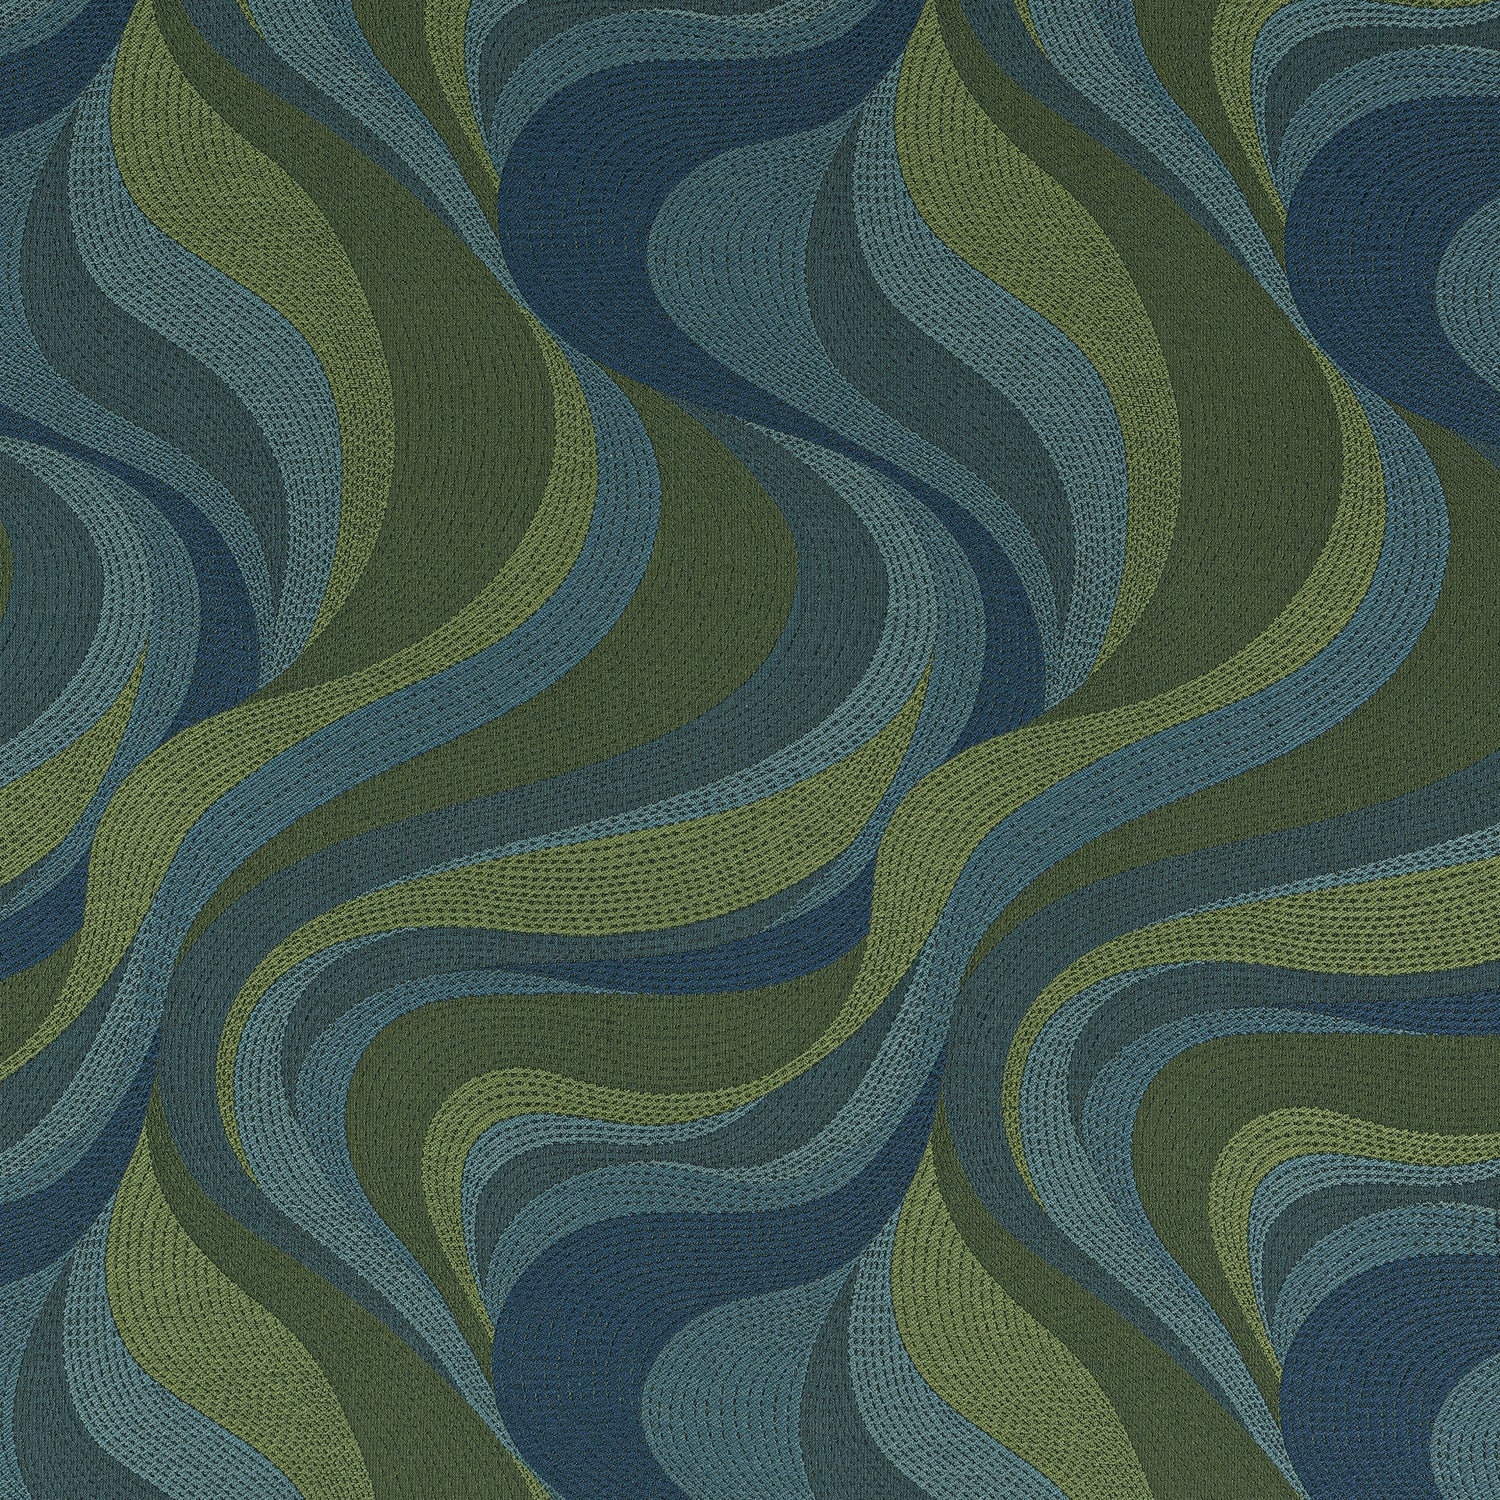 Passage fabric in lagoon color - pattern number W74200 - by Thibaut in the Passage collection